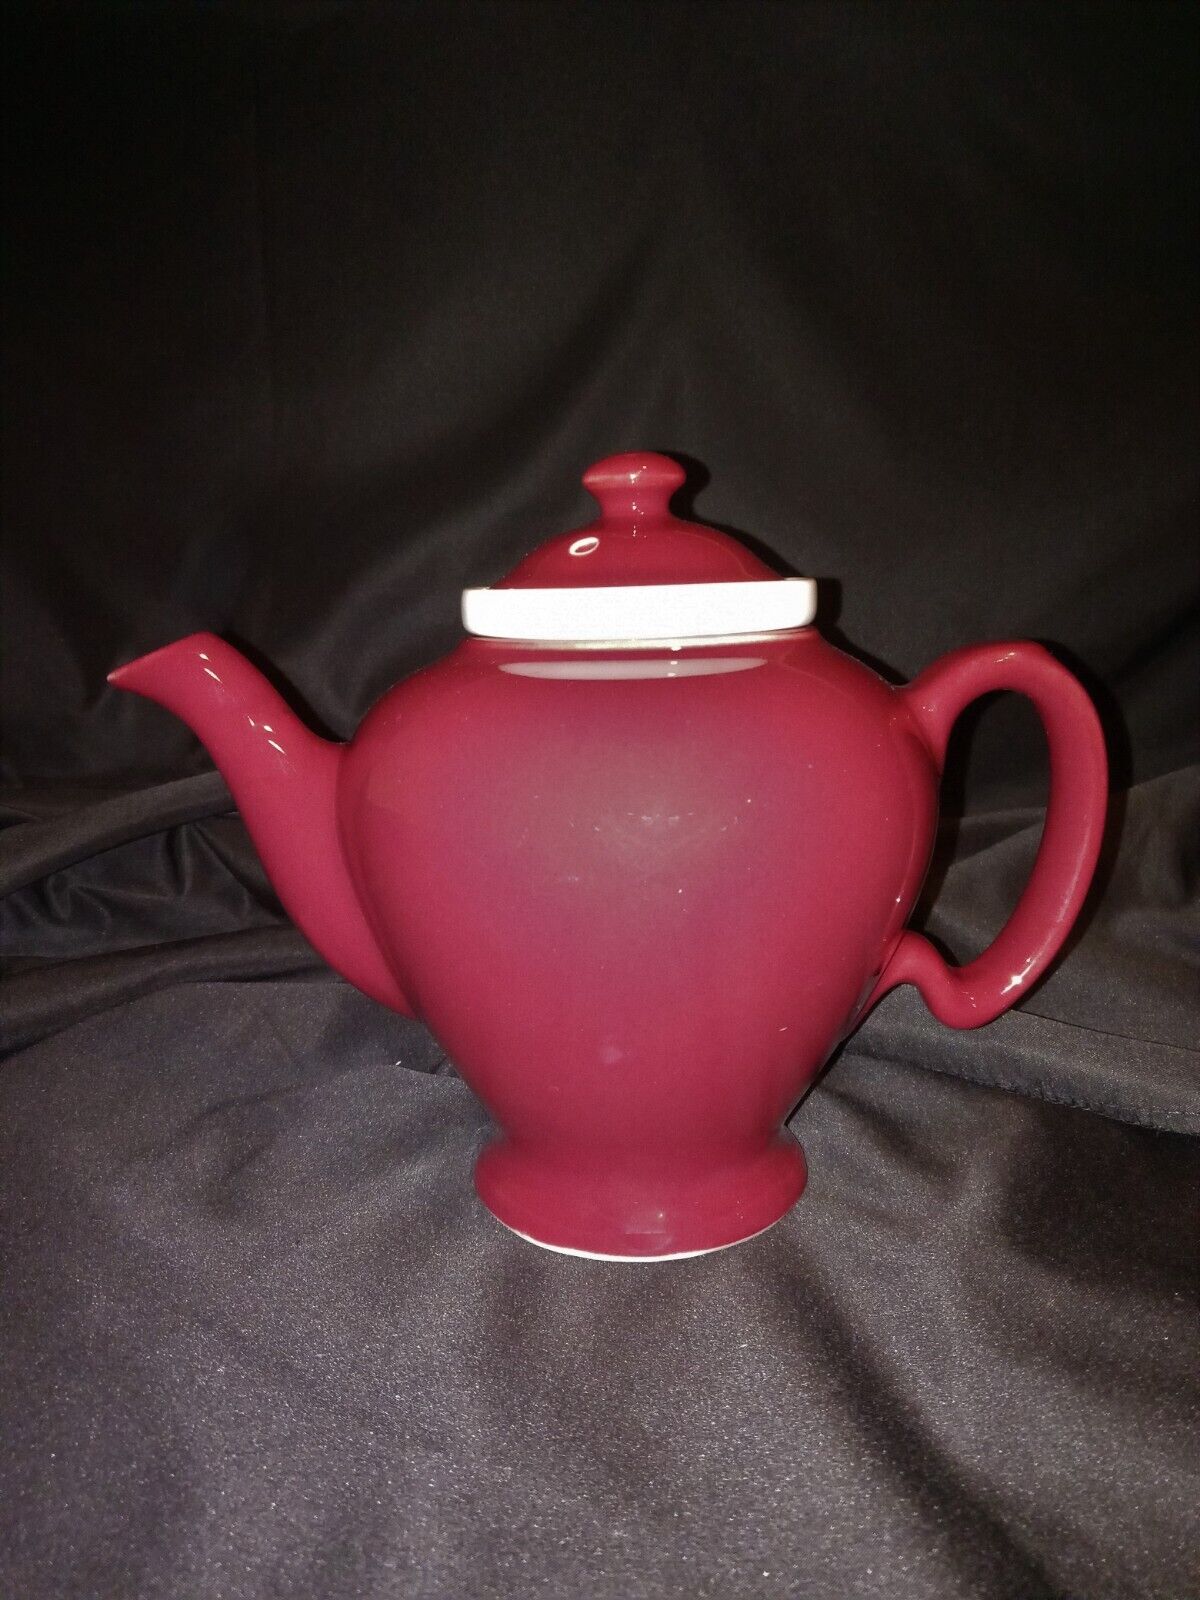 A PERFECT VINTAGE MCCORMICK BURGUNDY TEAPOT & INFUSER, MADE IN MARYLAND U.S.A.